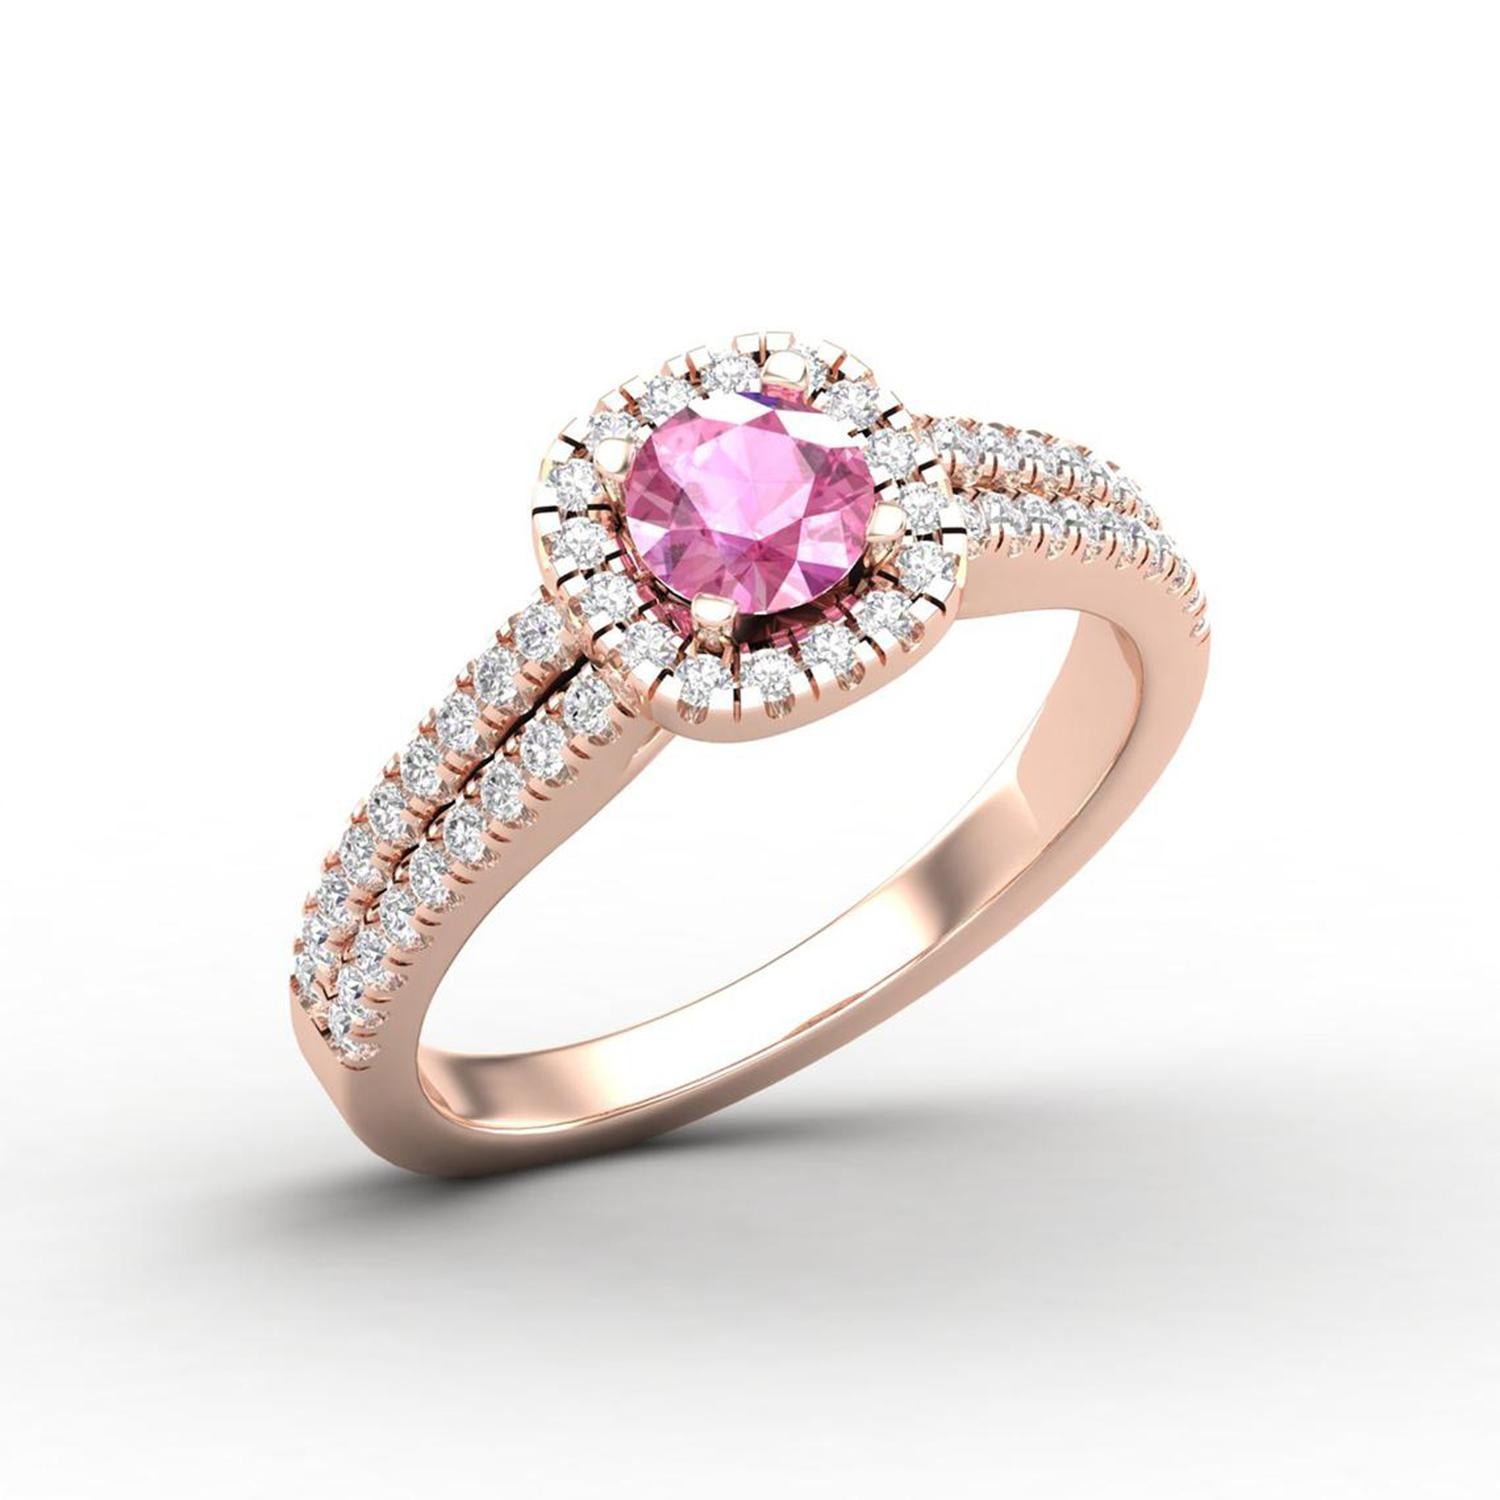 Women's 14 Karat Gold Pink Sapphire Ring / Round Diamond Ring / Solitaire Ring For Sale